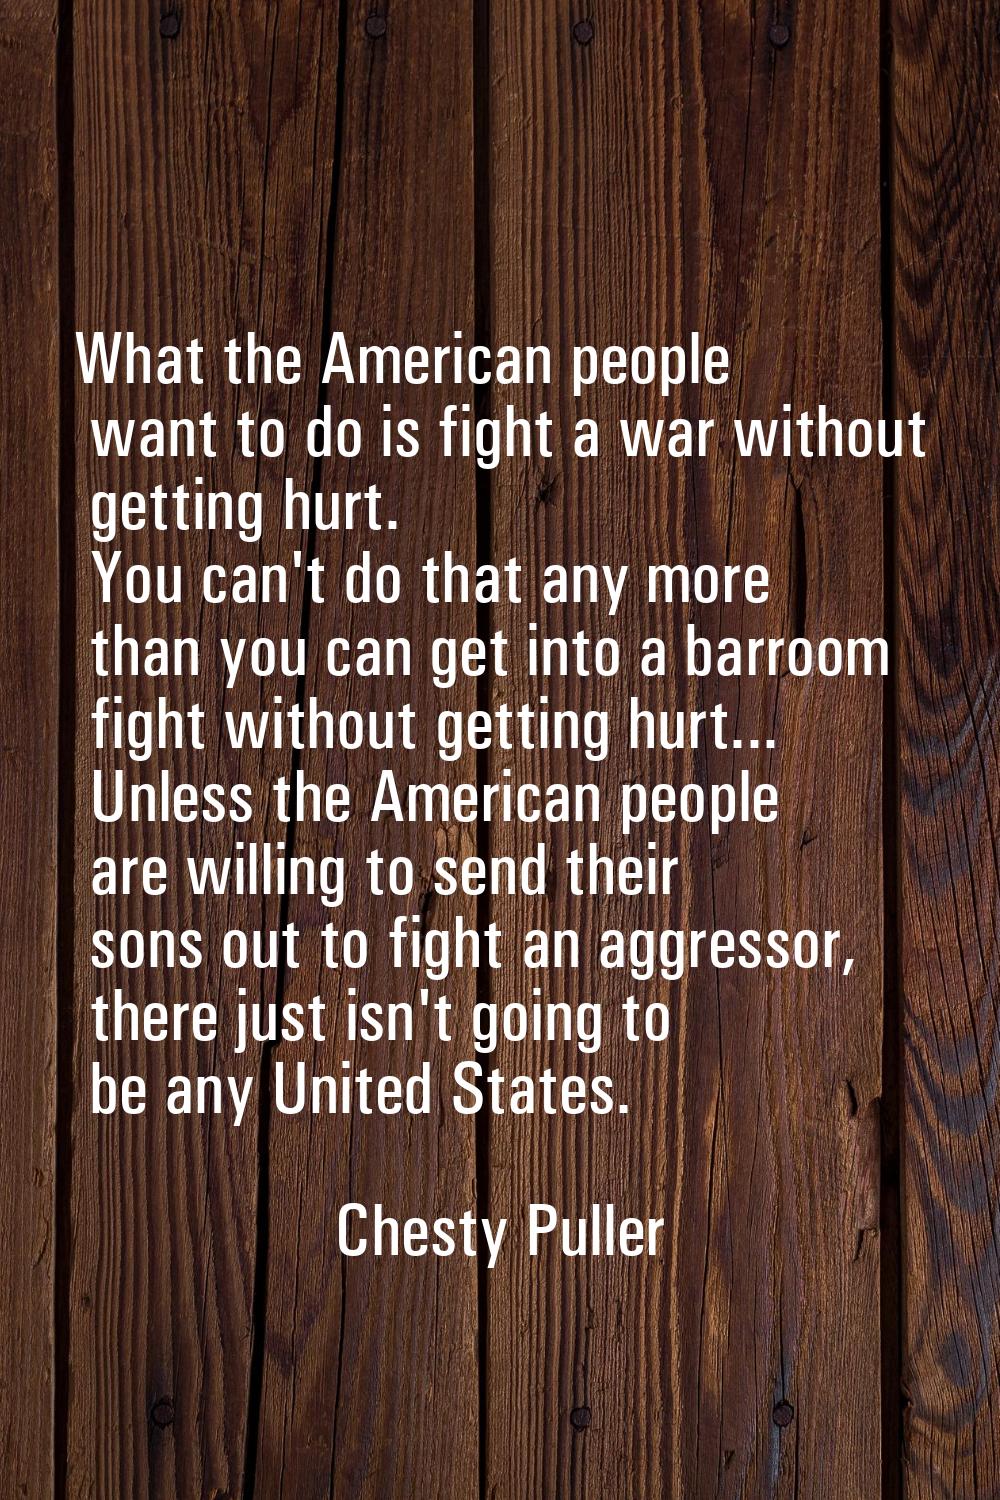 What the American people want to do is fight a war without getting hurt. You can't do that any more